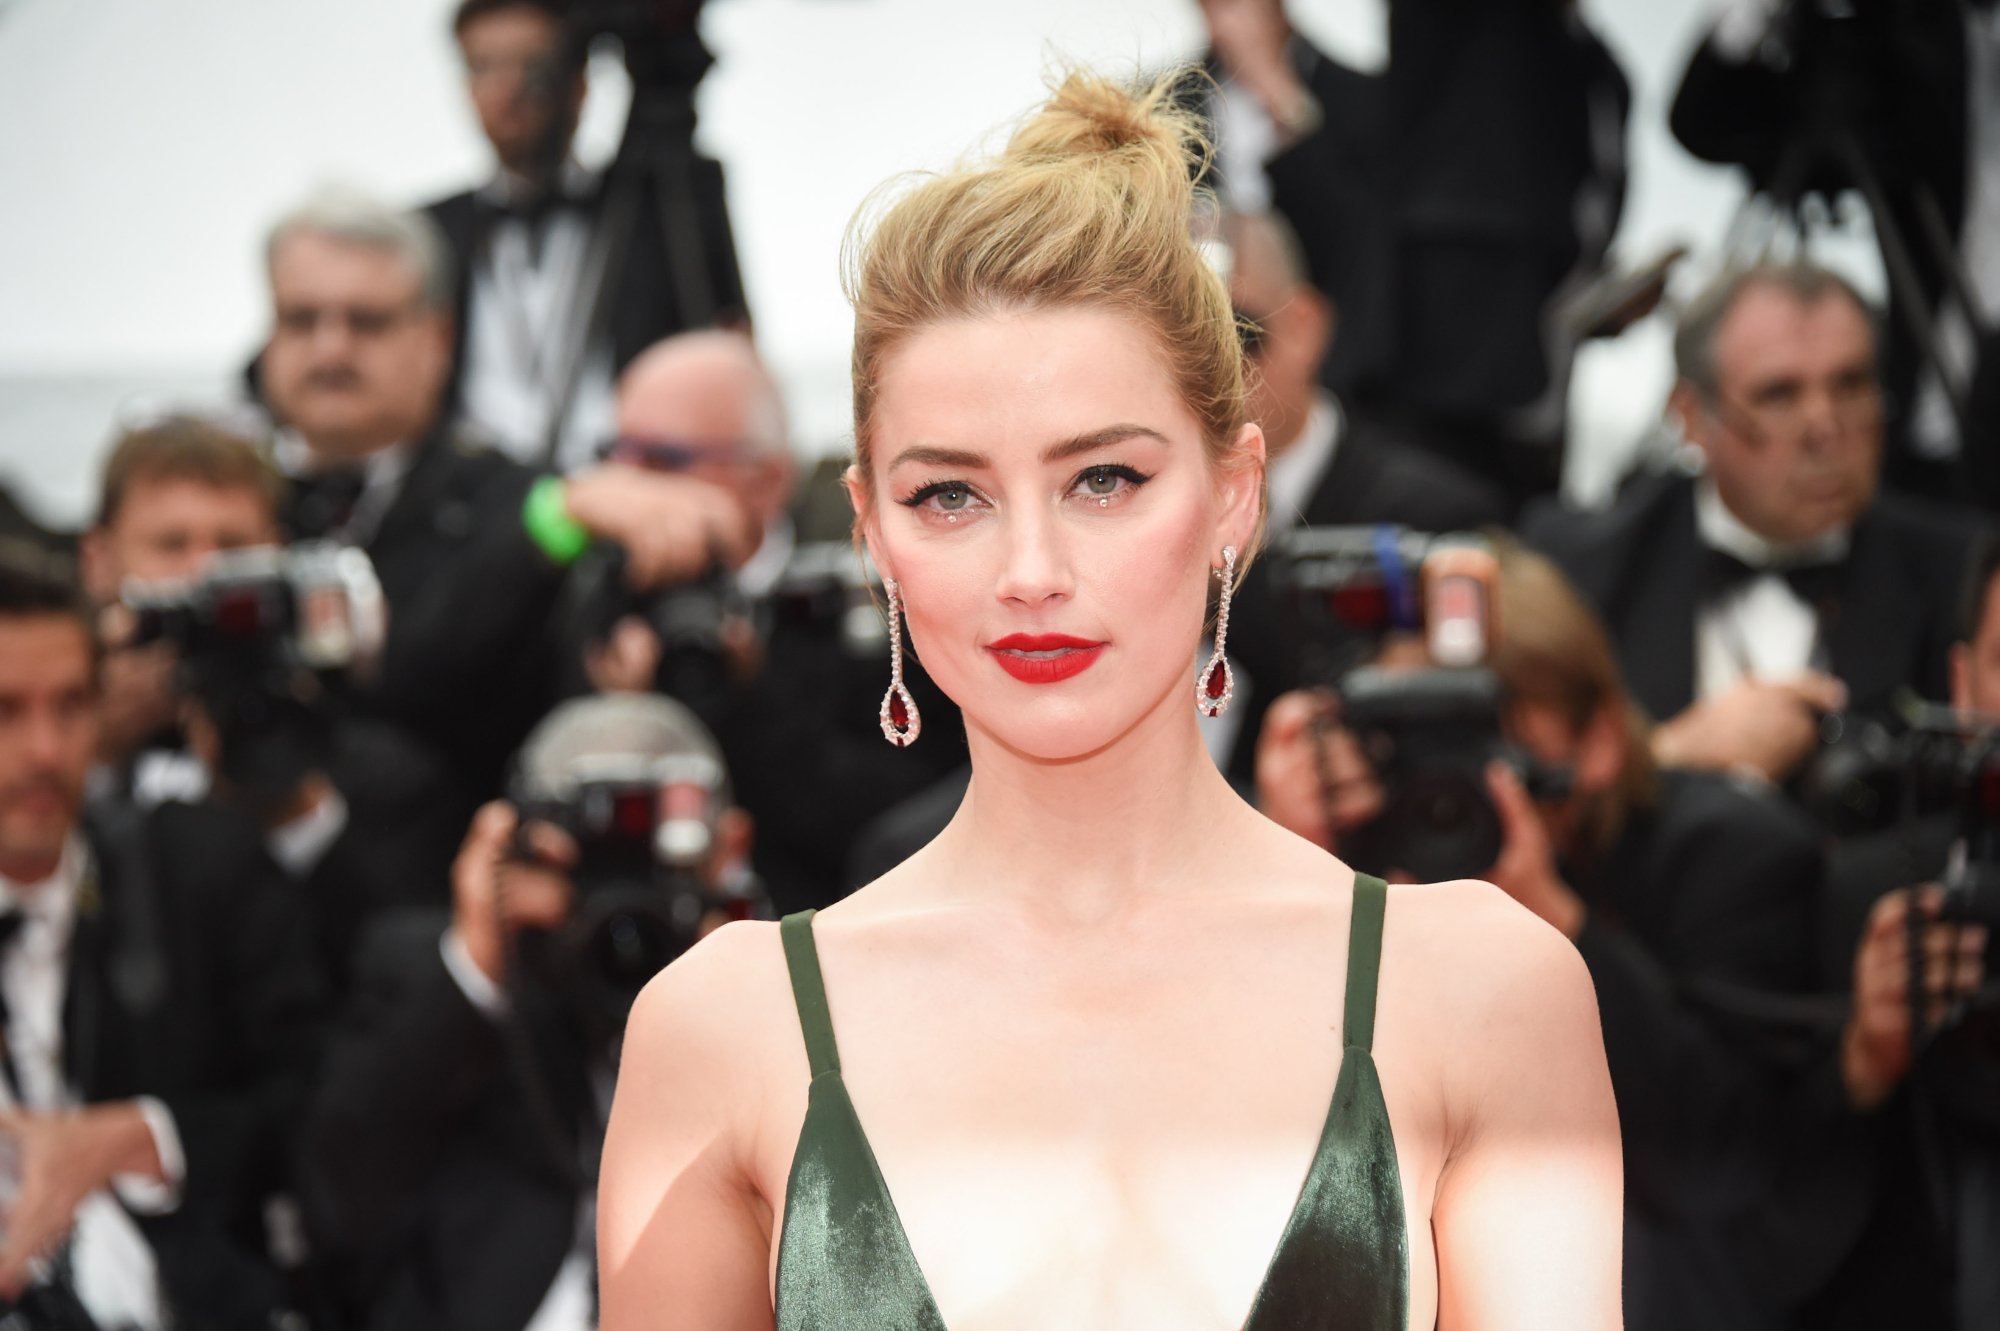 'Zombieland' actor Amber Heard with a slight smile wearing a green dress in front of photographers wearing suits